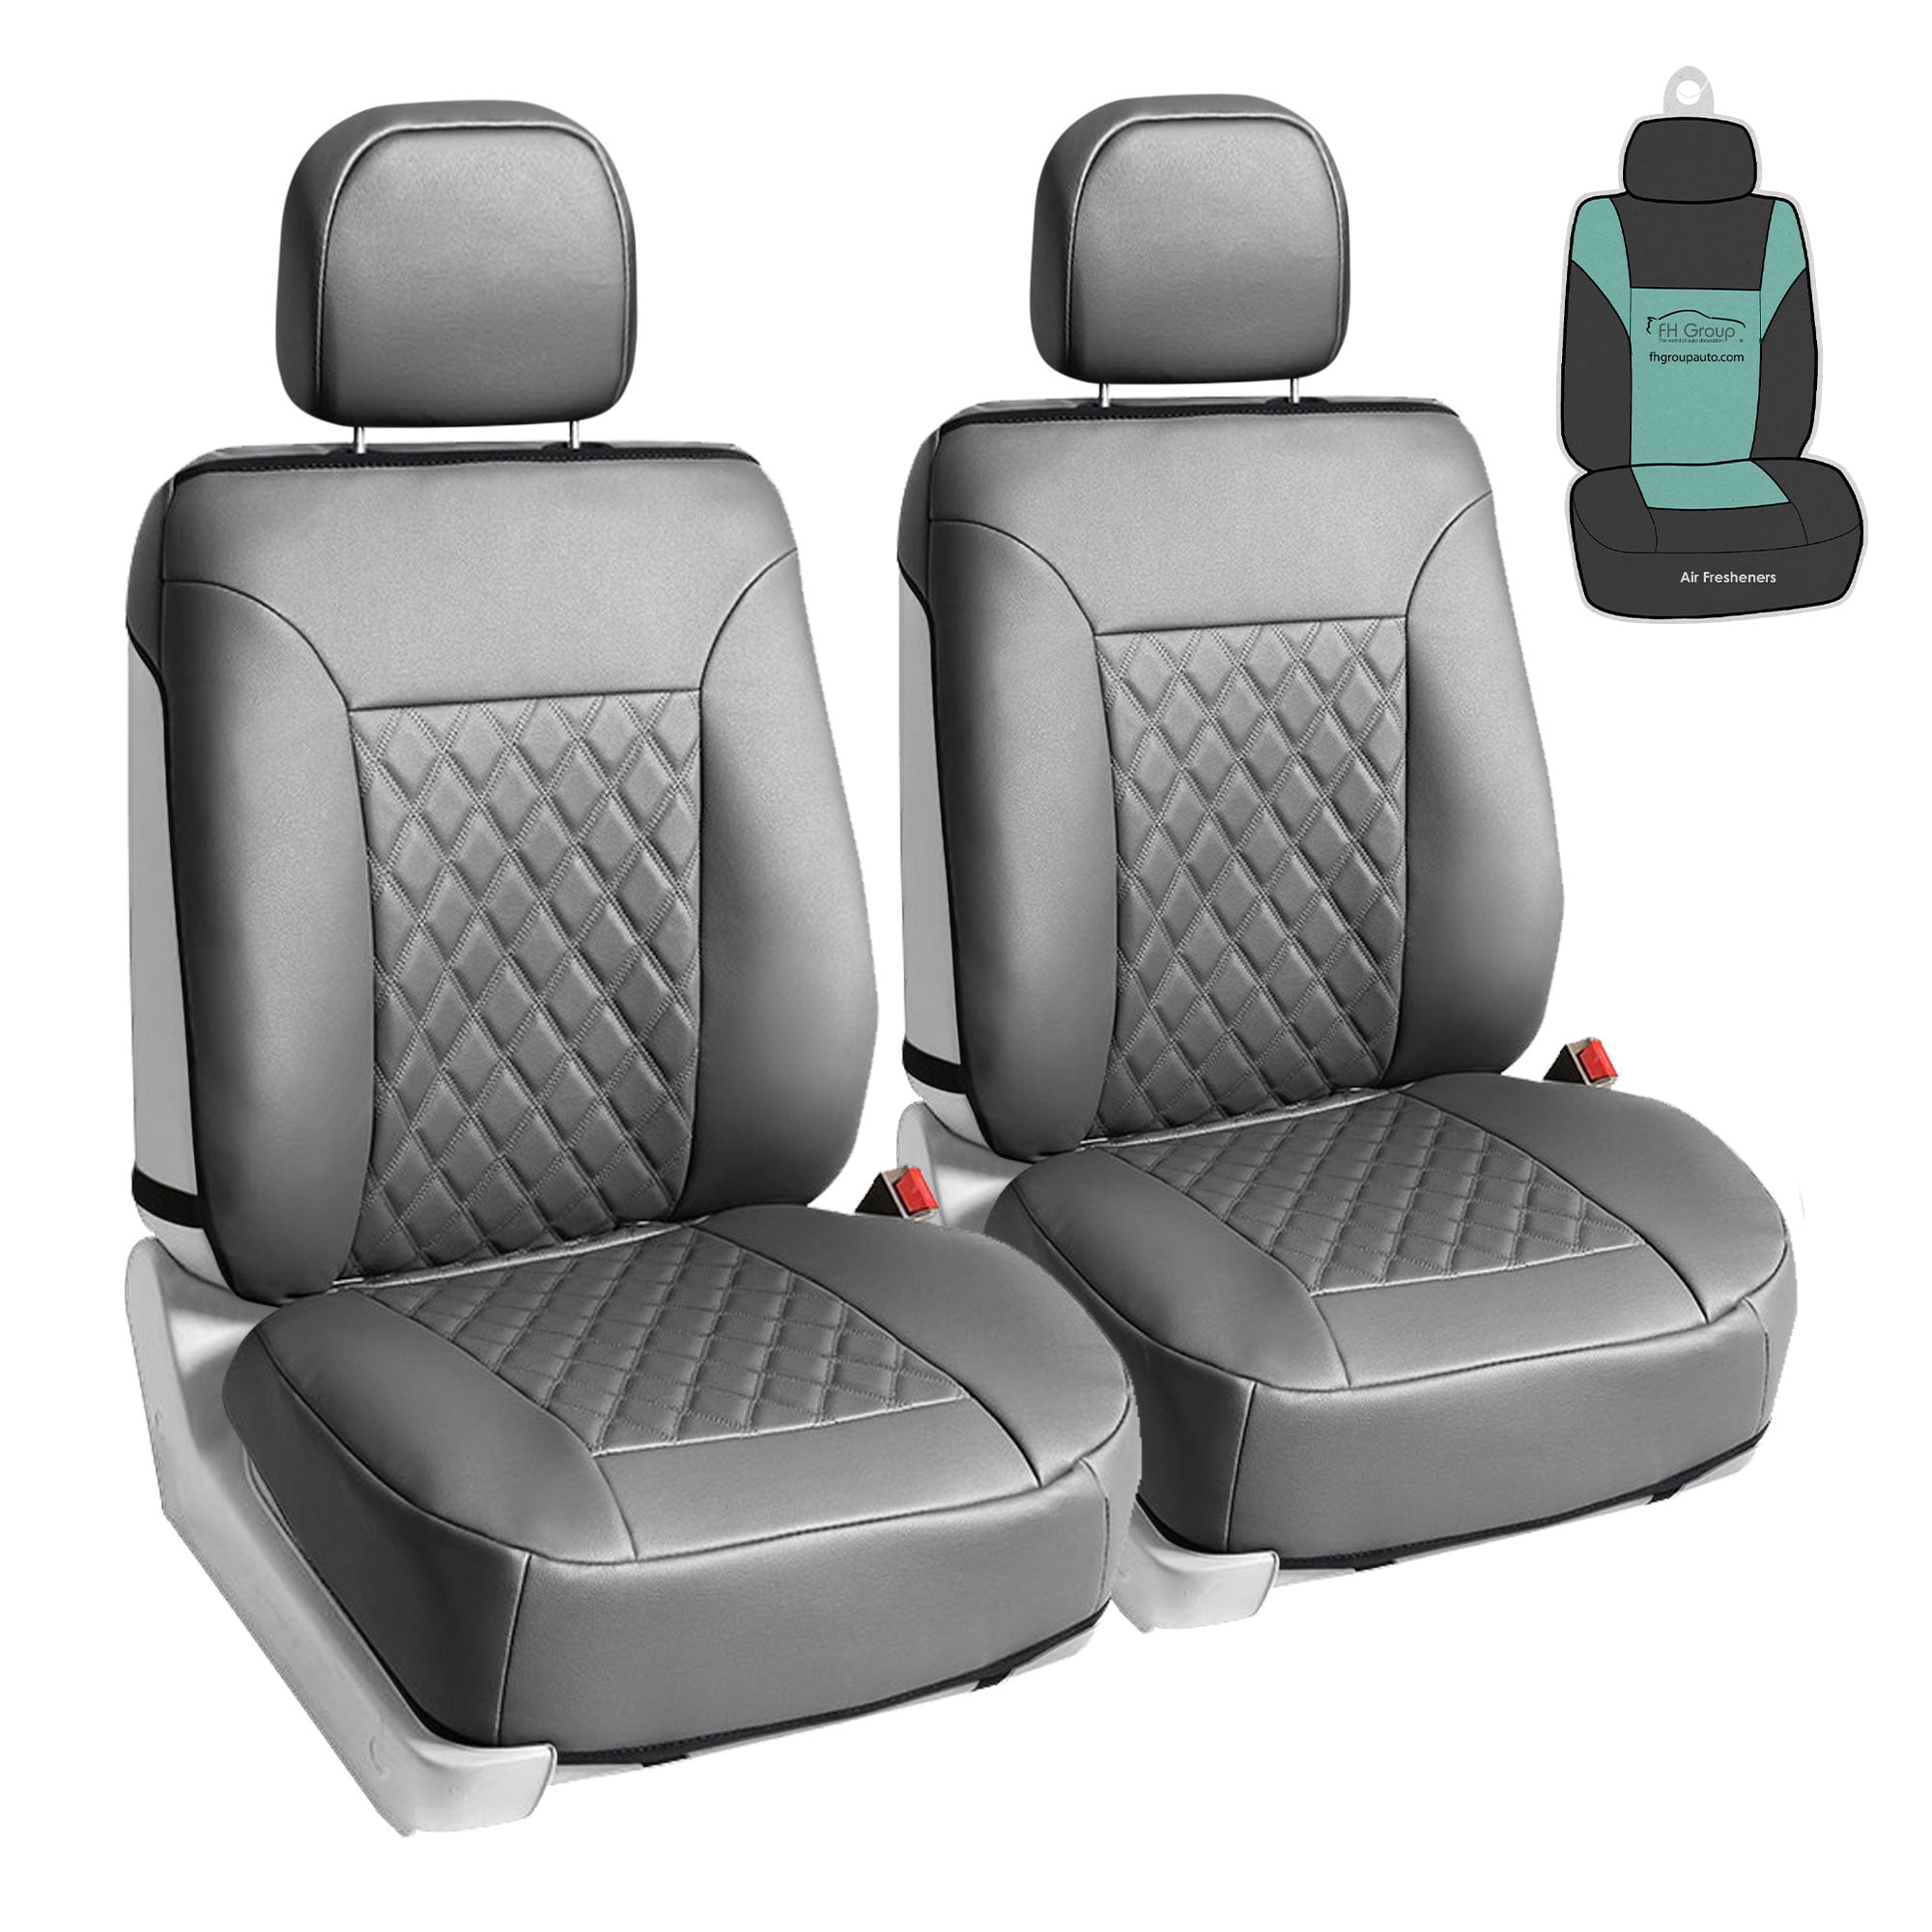 FH Group Car Seat Cushion – Durable PU Leather Car Seat Cushions, 2 Piece Front Set Car Seat Cushion, Bottom Seat Protector, Water Resistant Car